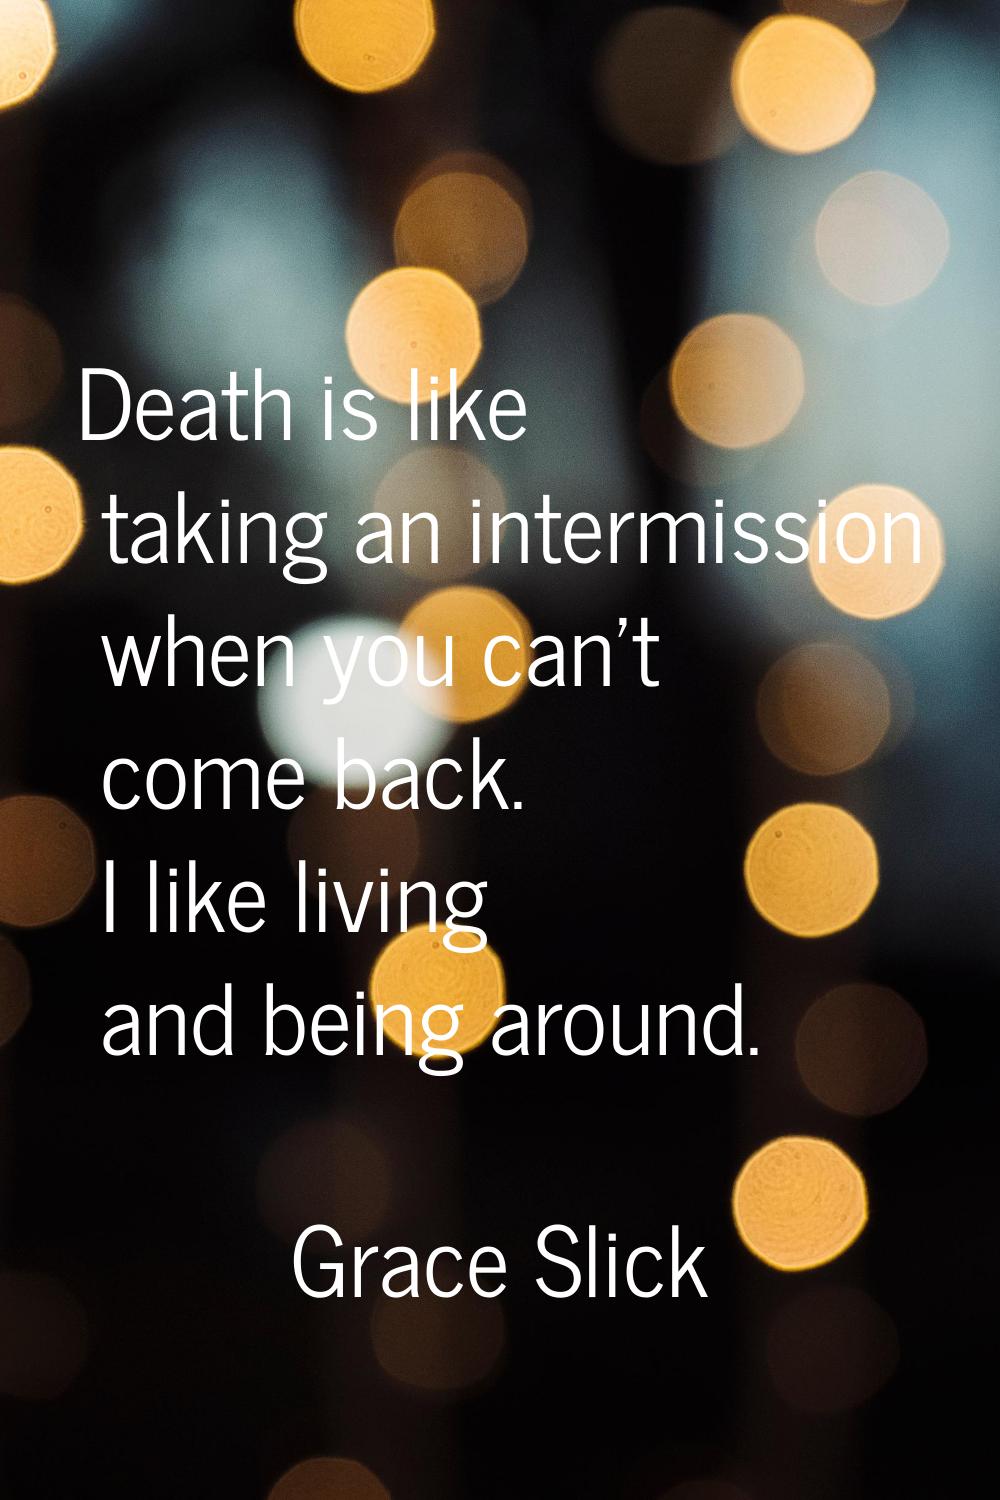 Death is like taking an intermission when you can't come back. I like living and being around.